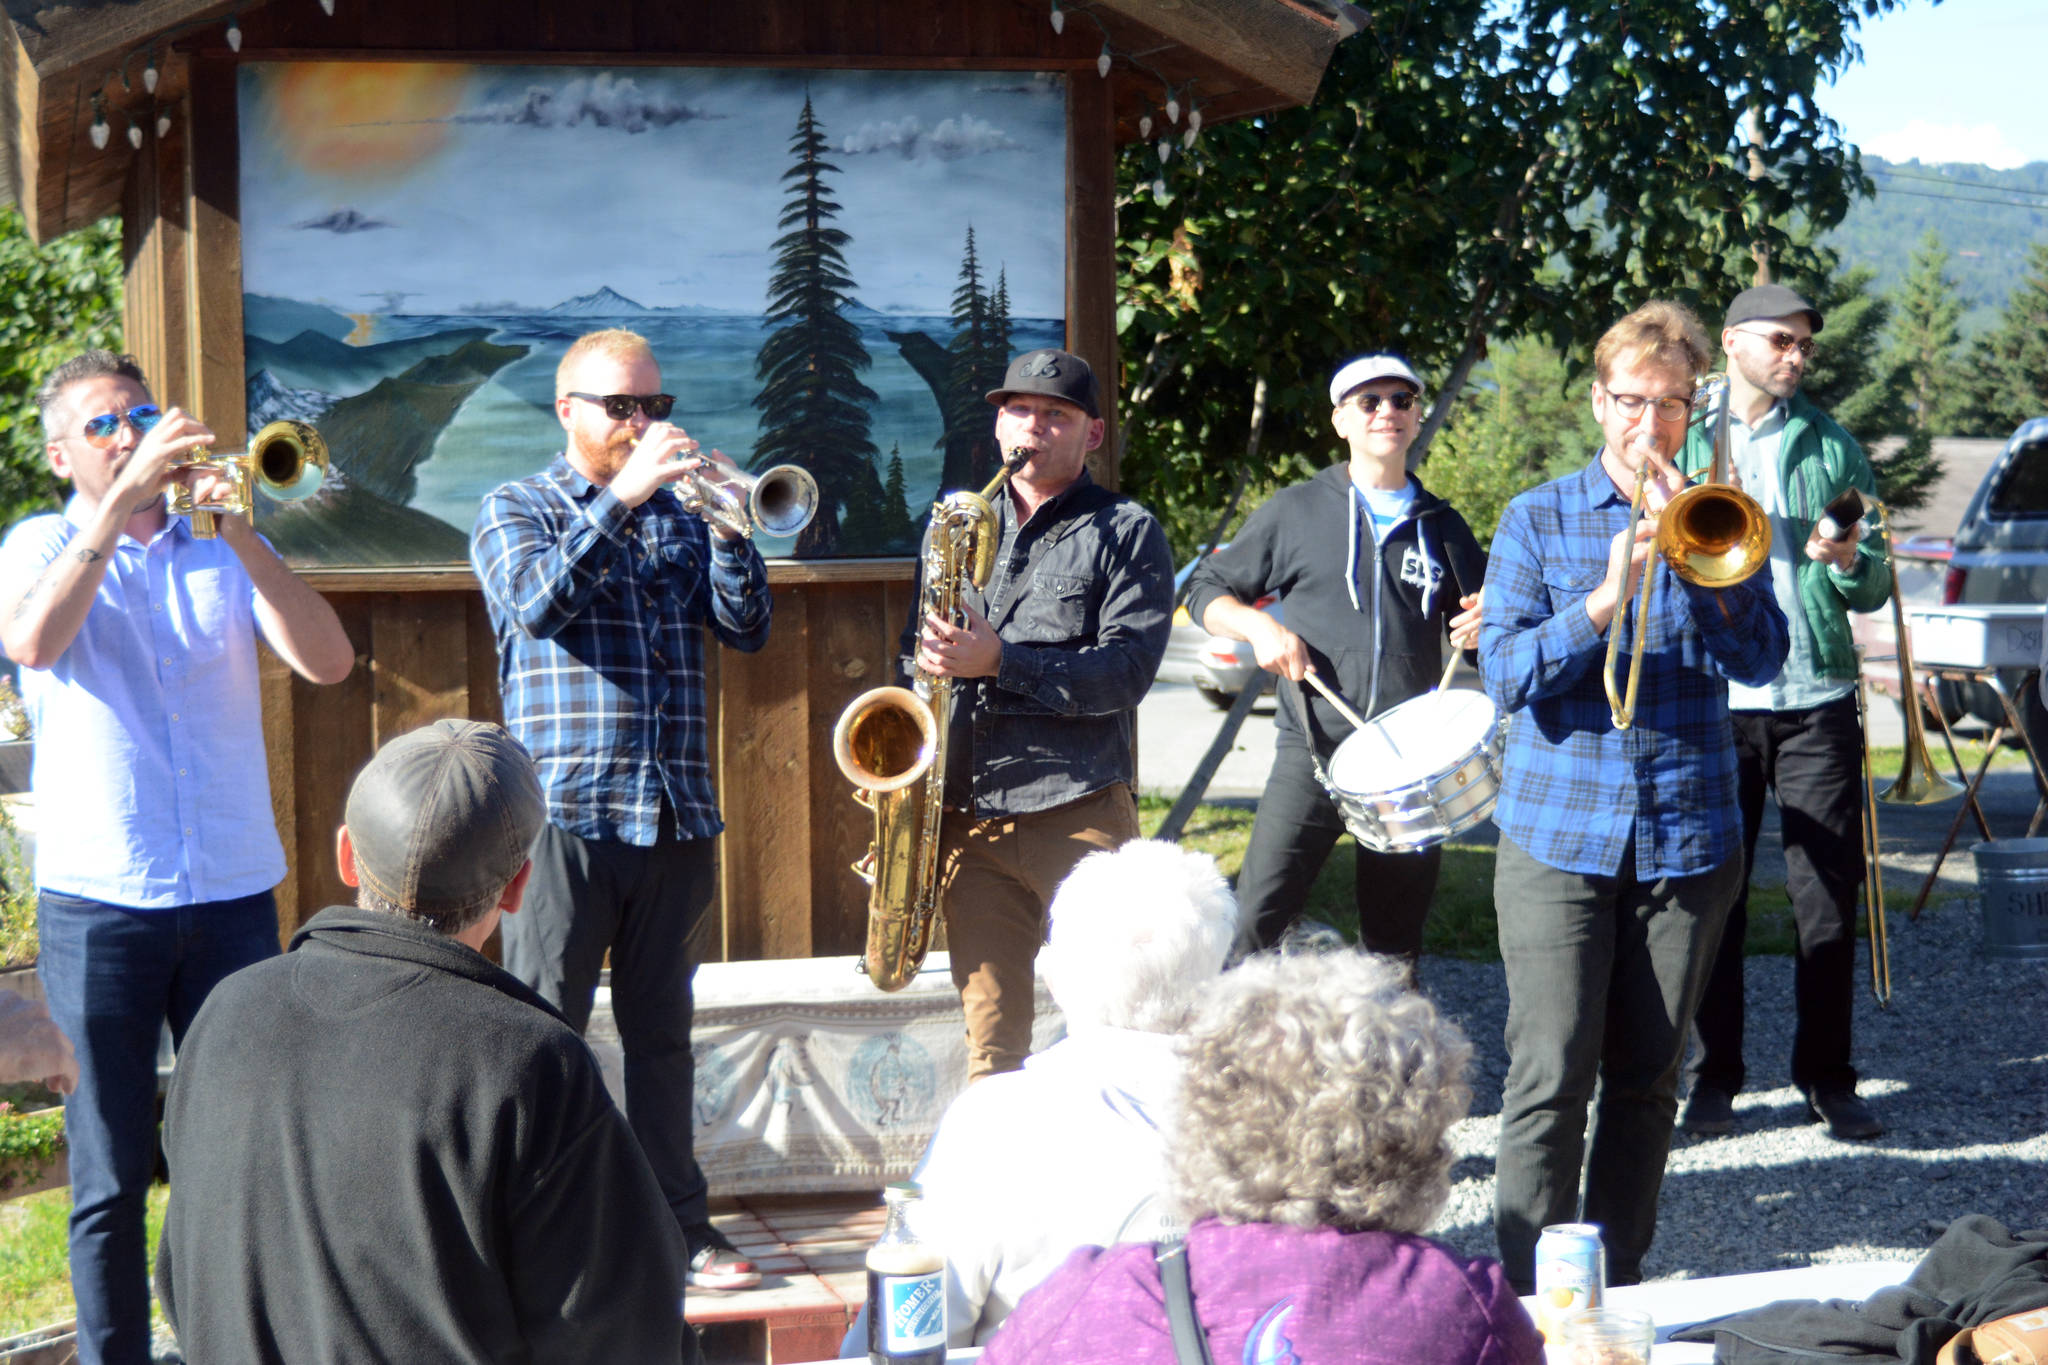 Members of the LowDown Brass Band perform an impromptu session Tuesday Aug. 7, 2018 at the Homer Brewery in Homer, Alaska. The band played at Salmonfest on Saturday, at Alice’s Champagne Palace on Tuesday at Soldotna Creek Park on Wednesday. (Photo by Michael Armstrong/Homer News)